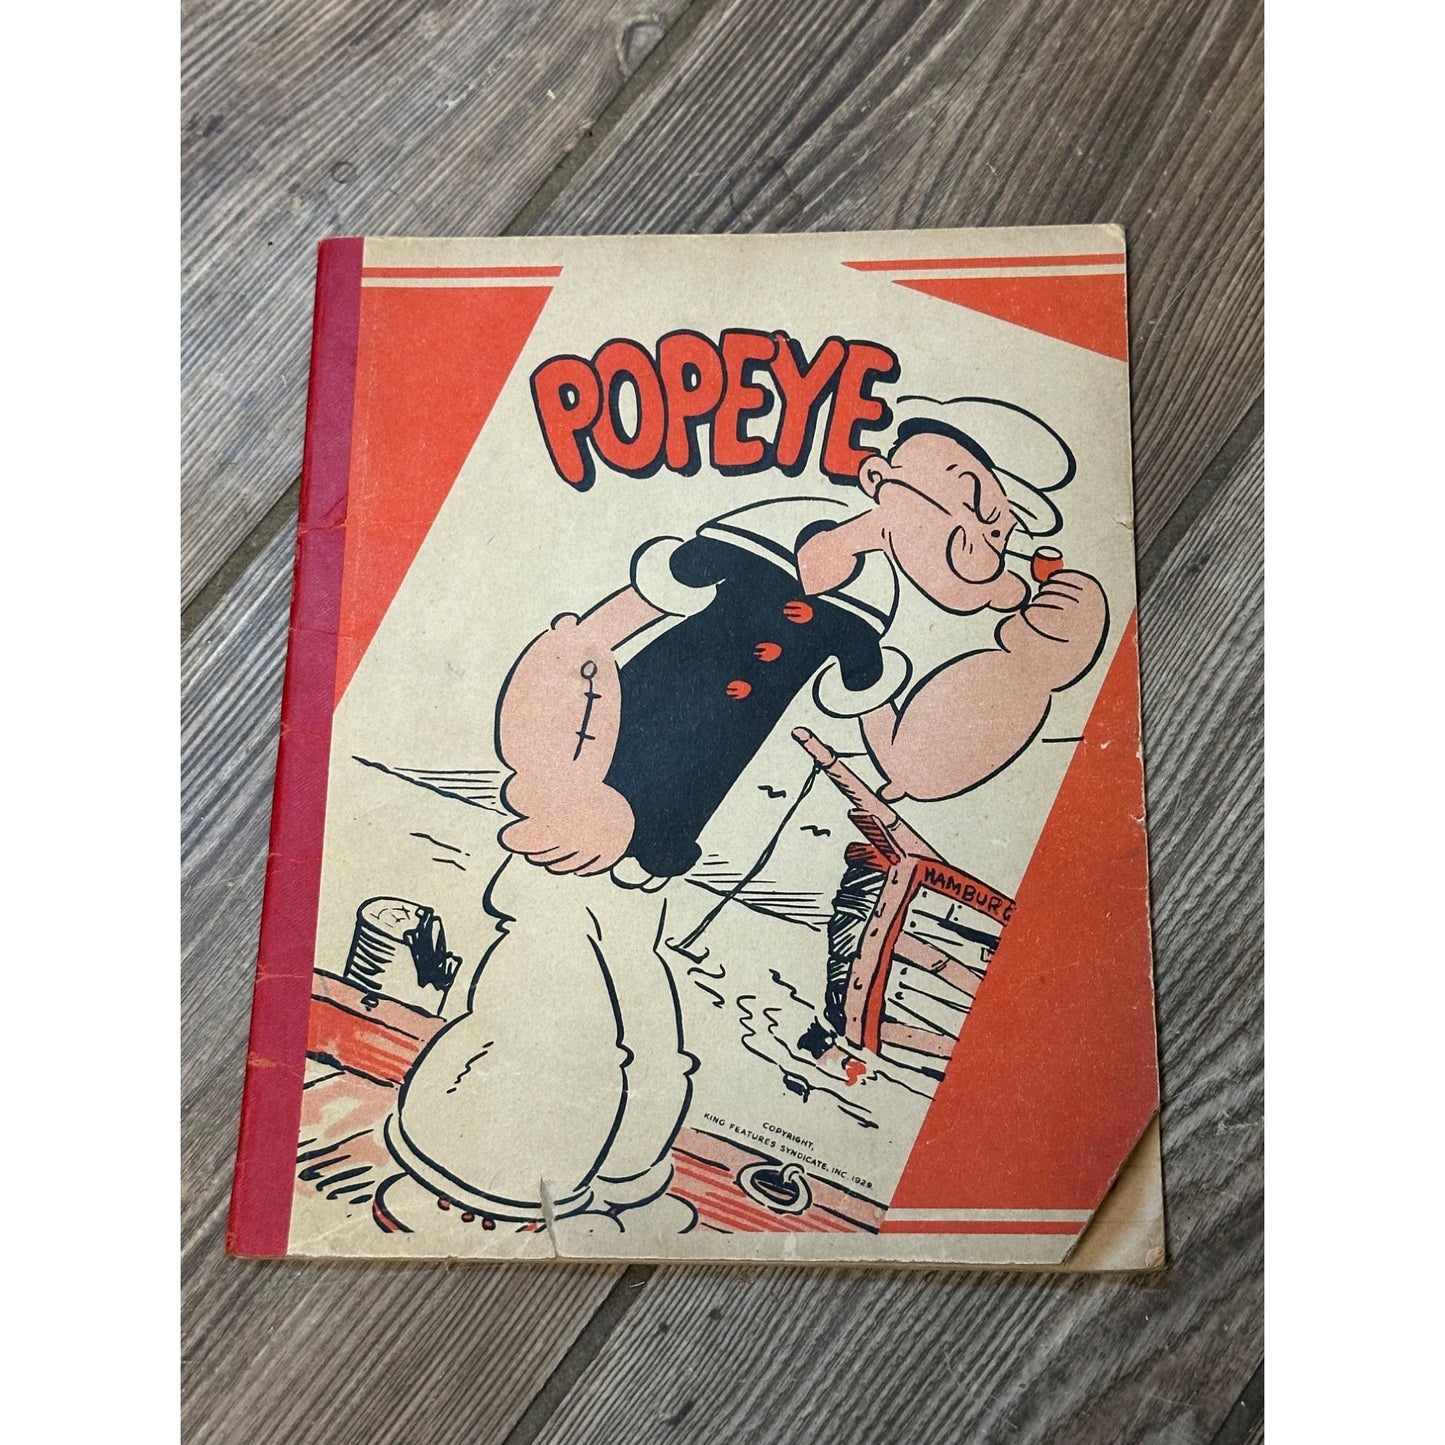 1929 POPEYE THE SAILOR CHILDREN'S COMPOSITION BOOK / TABLET NOTE BOOK